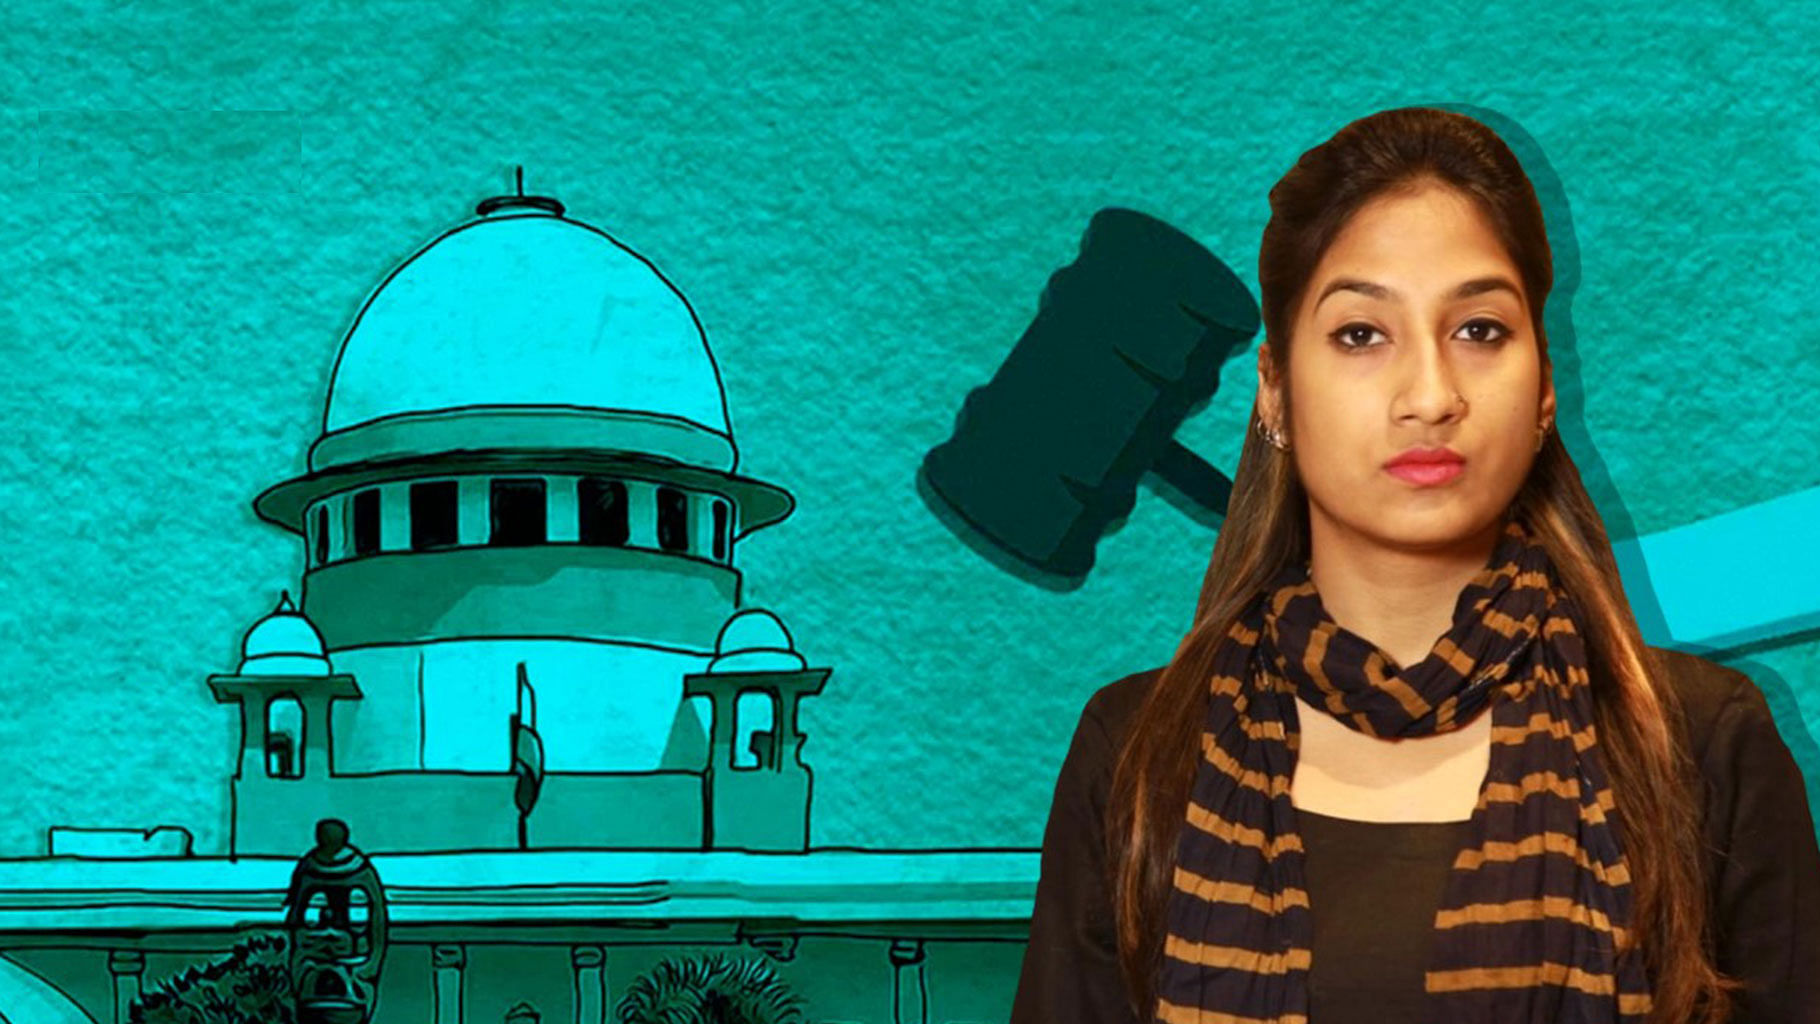 Why Sleep After Rape? High Court Seeks to Redefine ‘Ideal’ Indian Woman